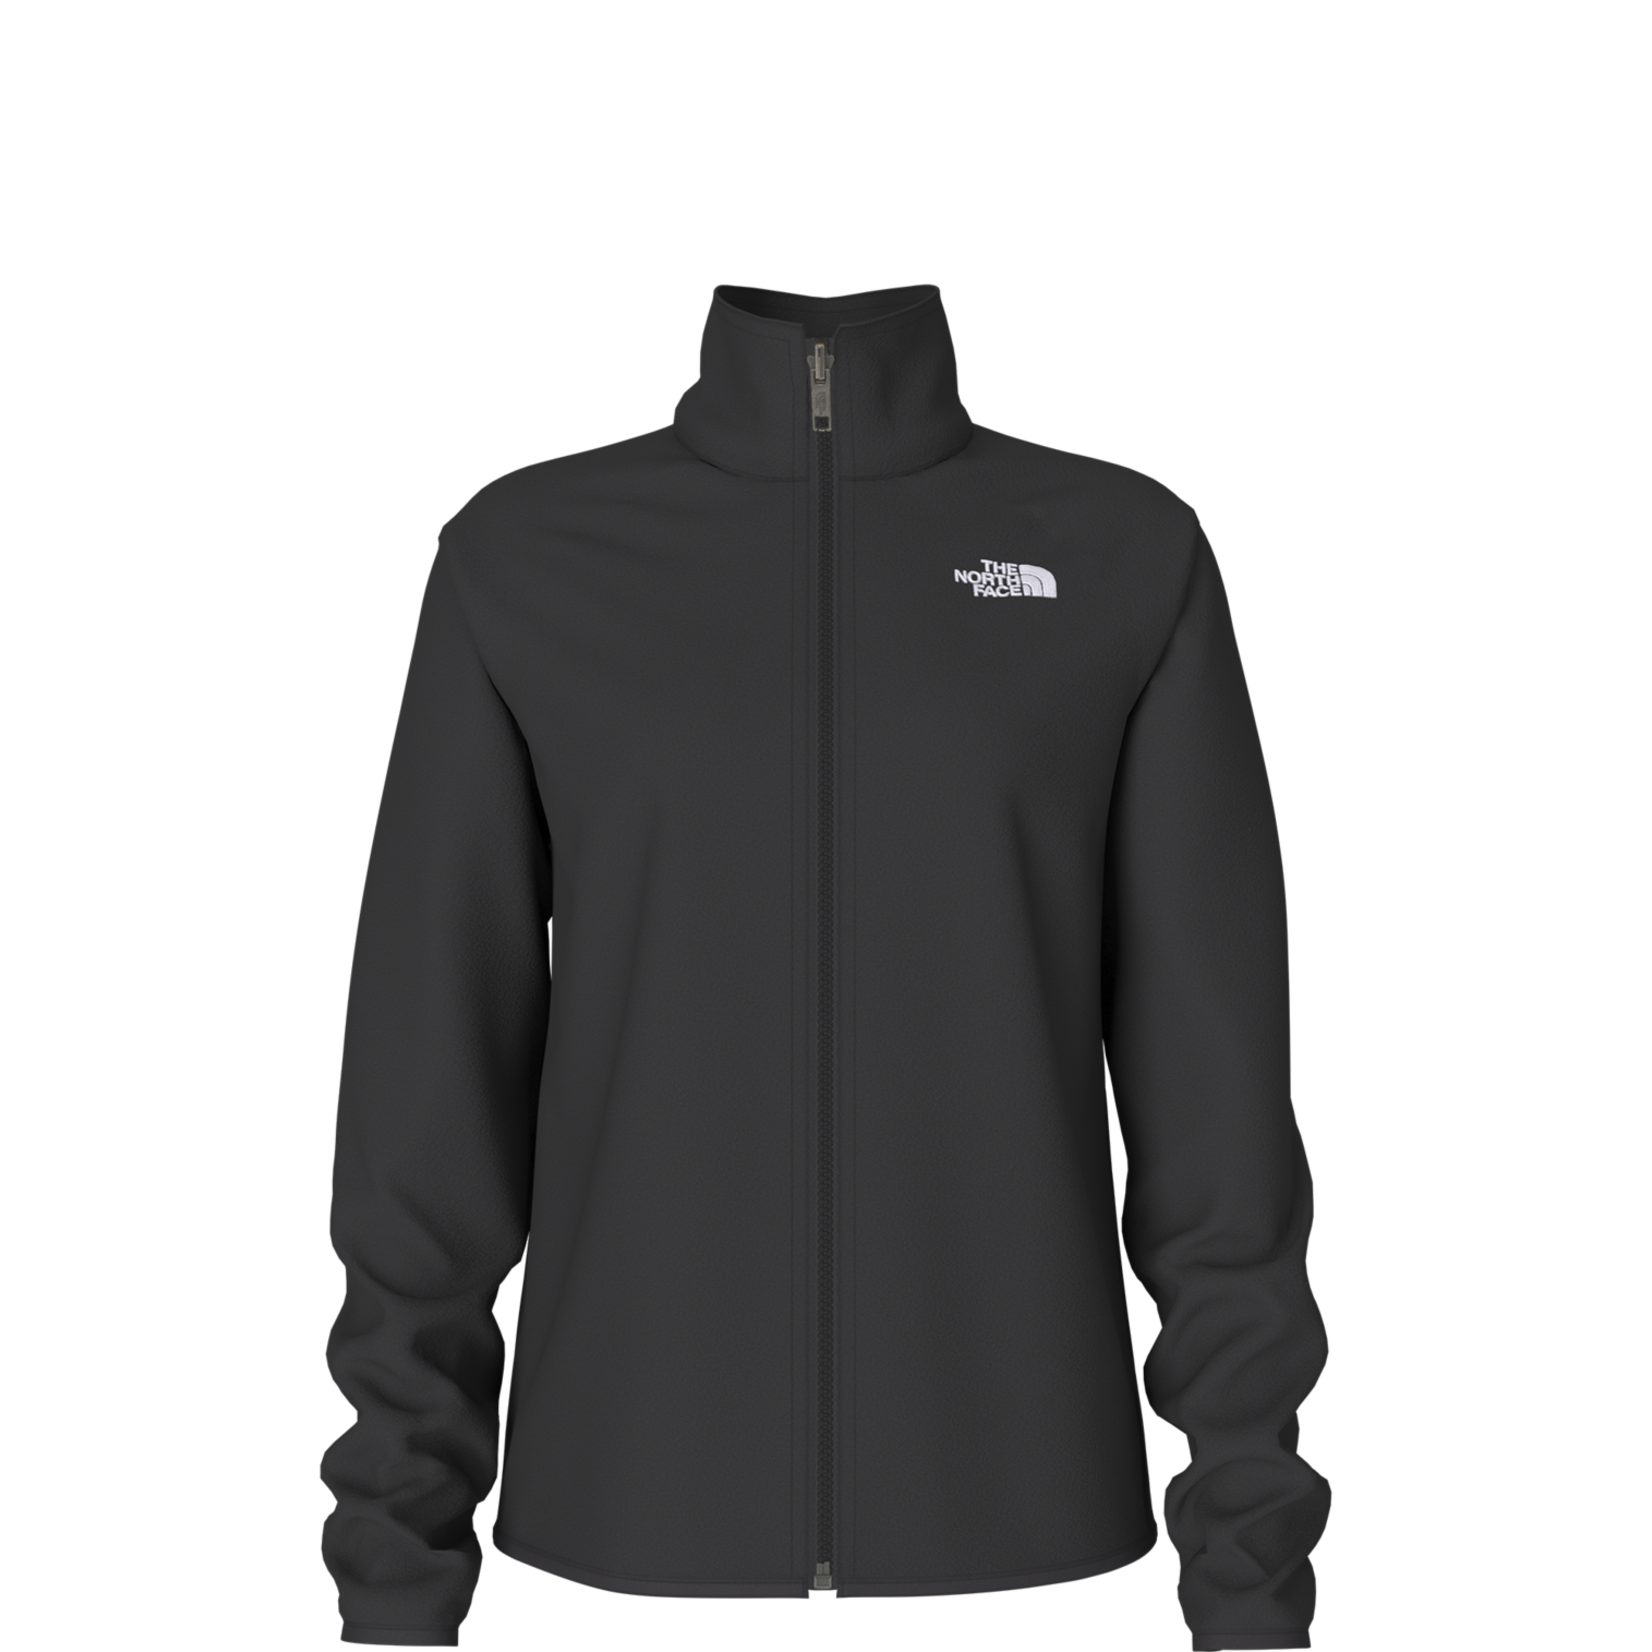 The North Face Boys' Vortex Triclimate Jacket for Sale - Ski Shack ...